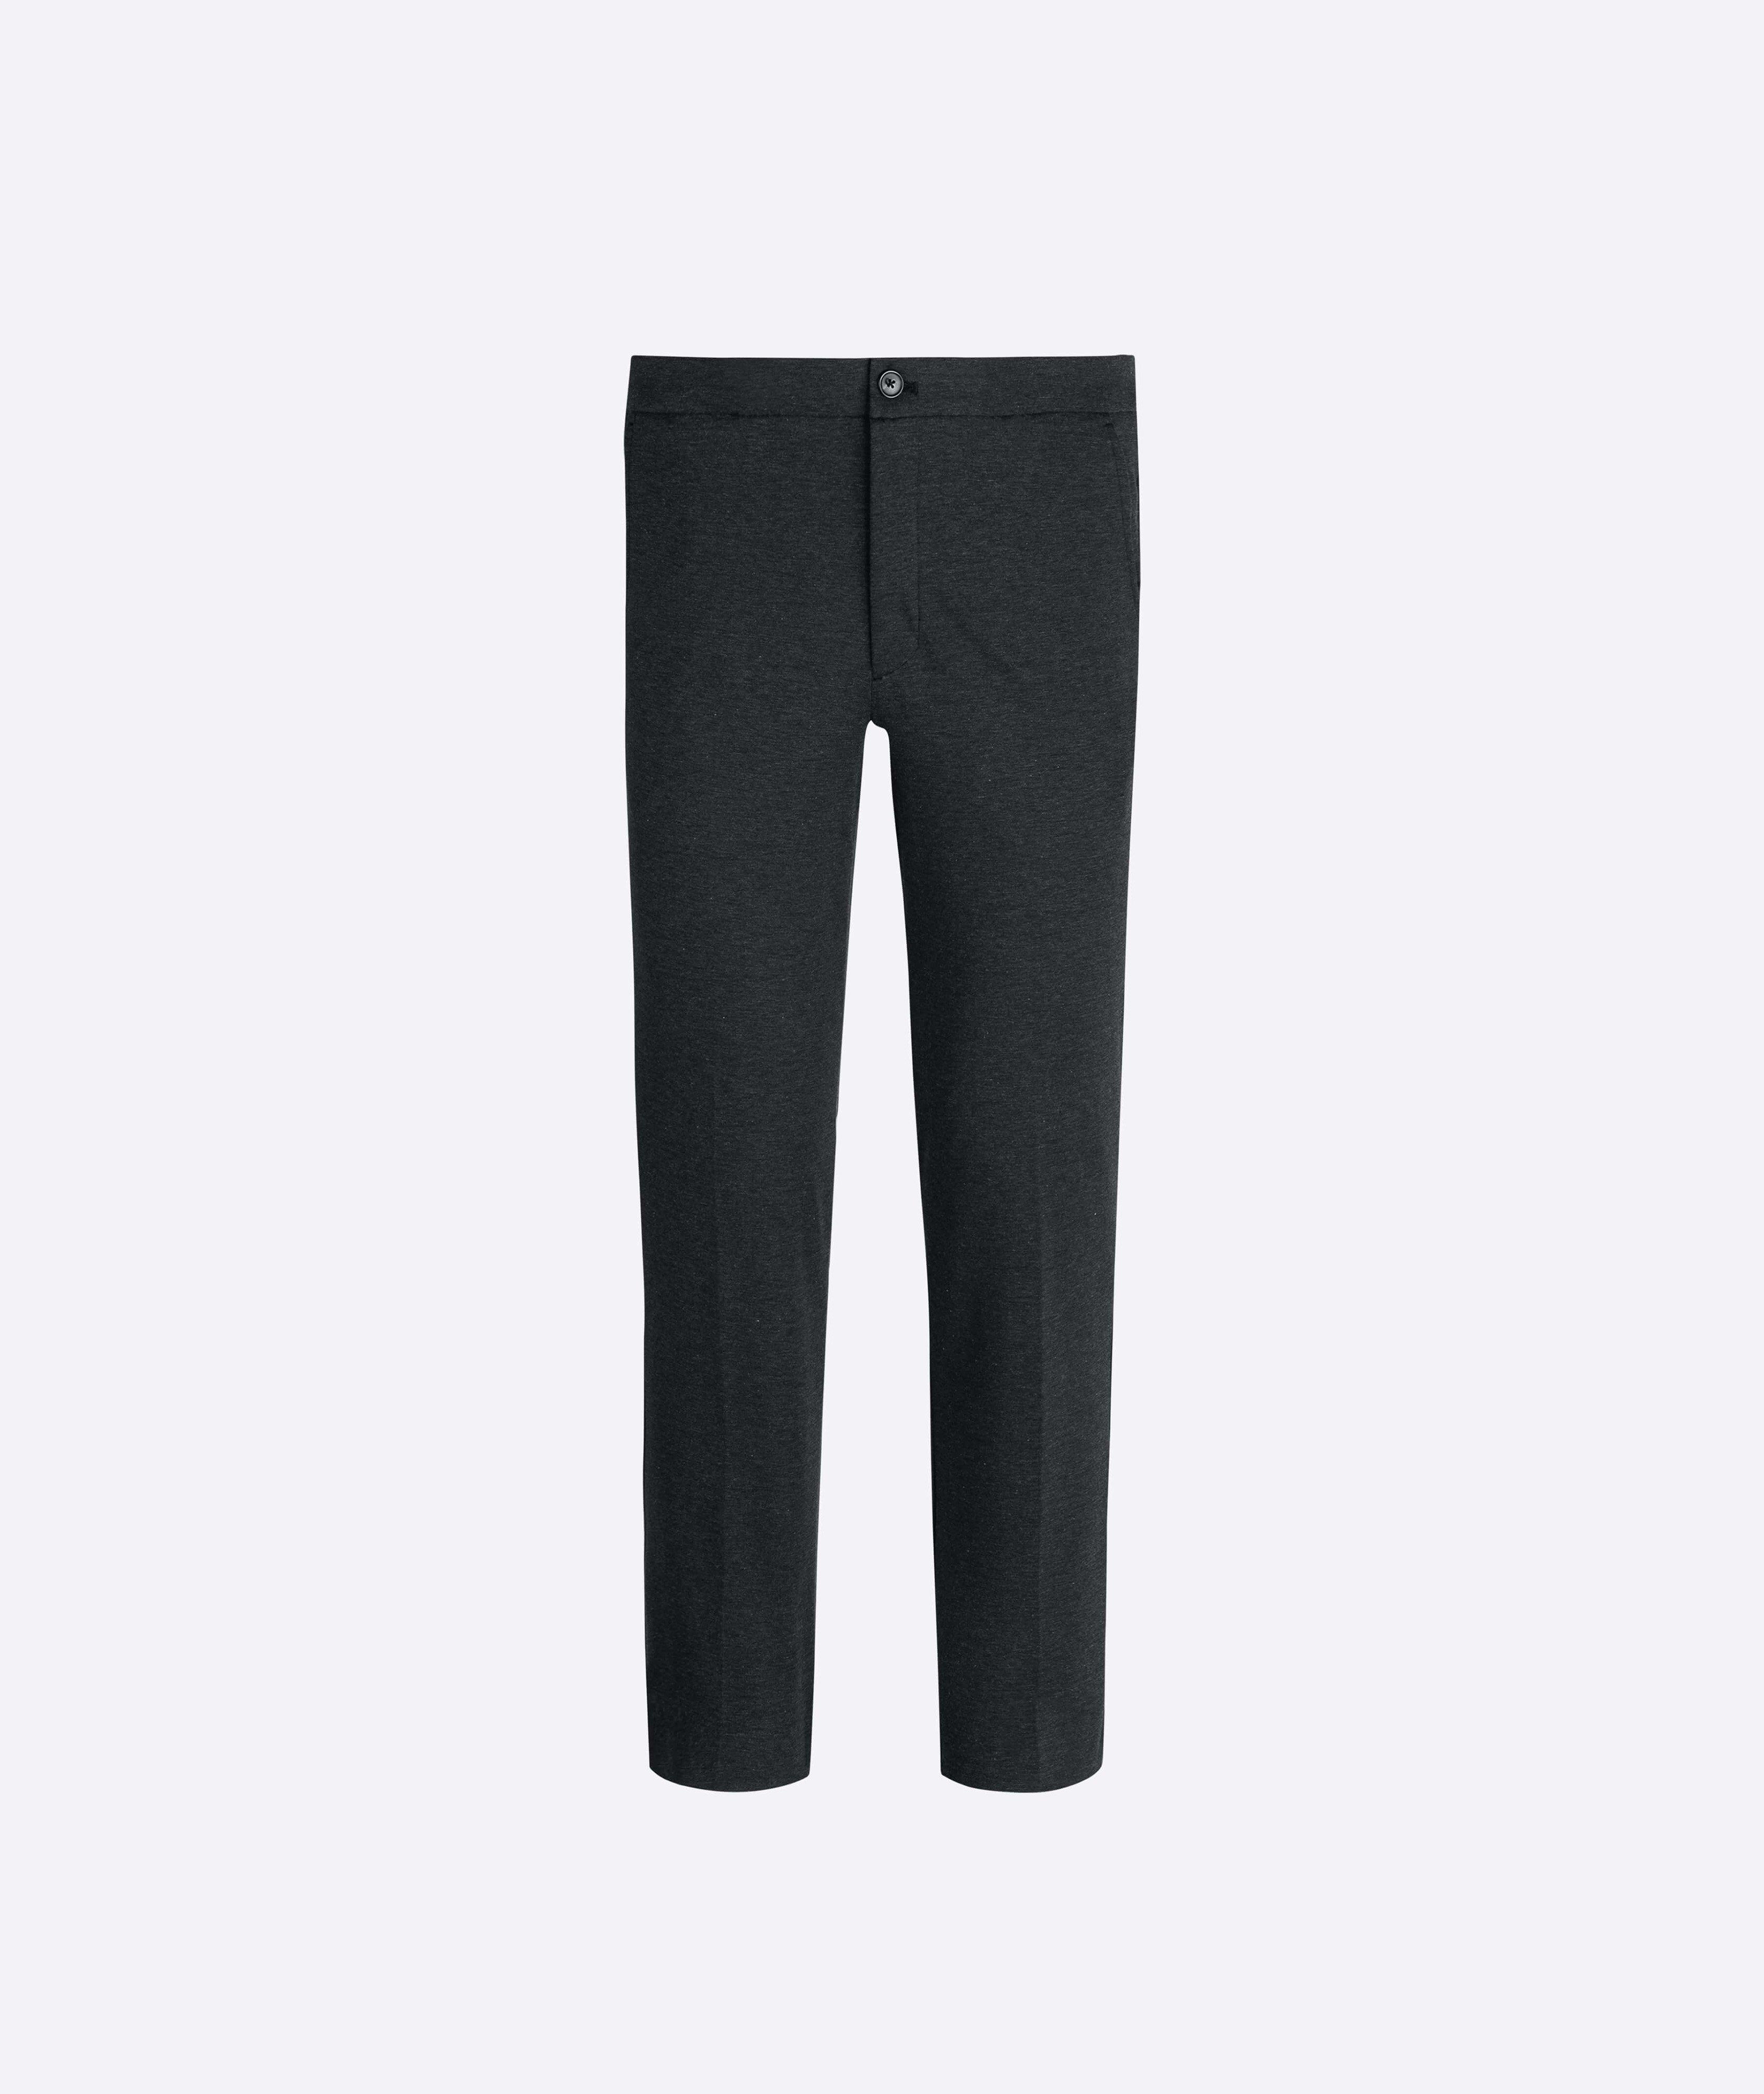 Flat Front Casual Pant image 0